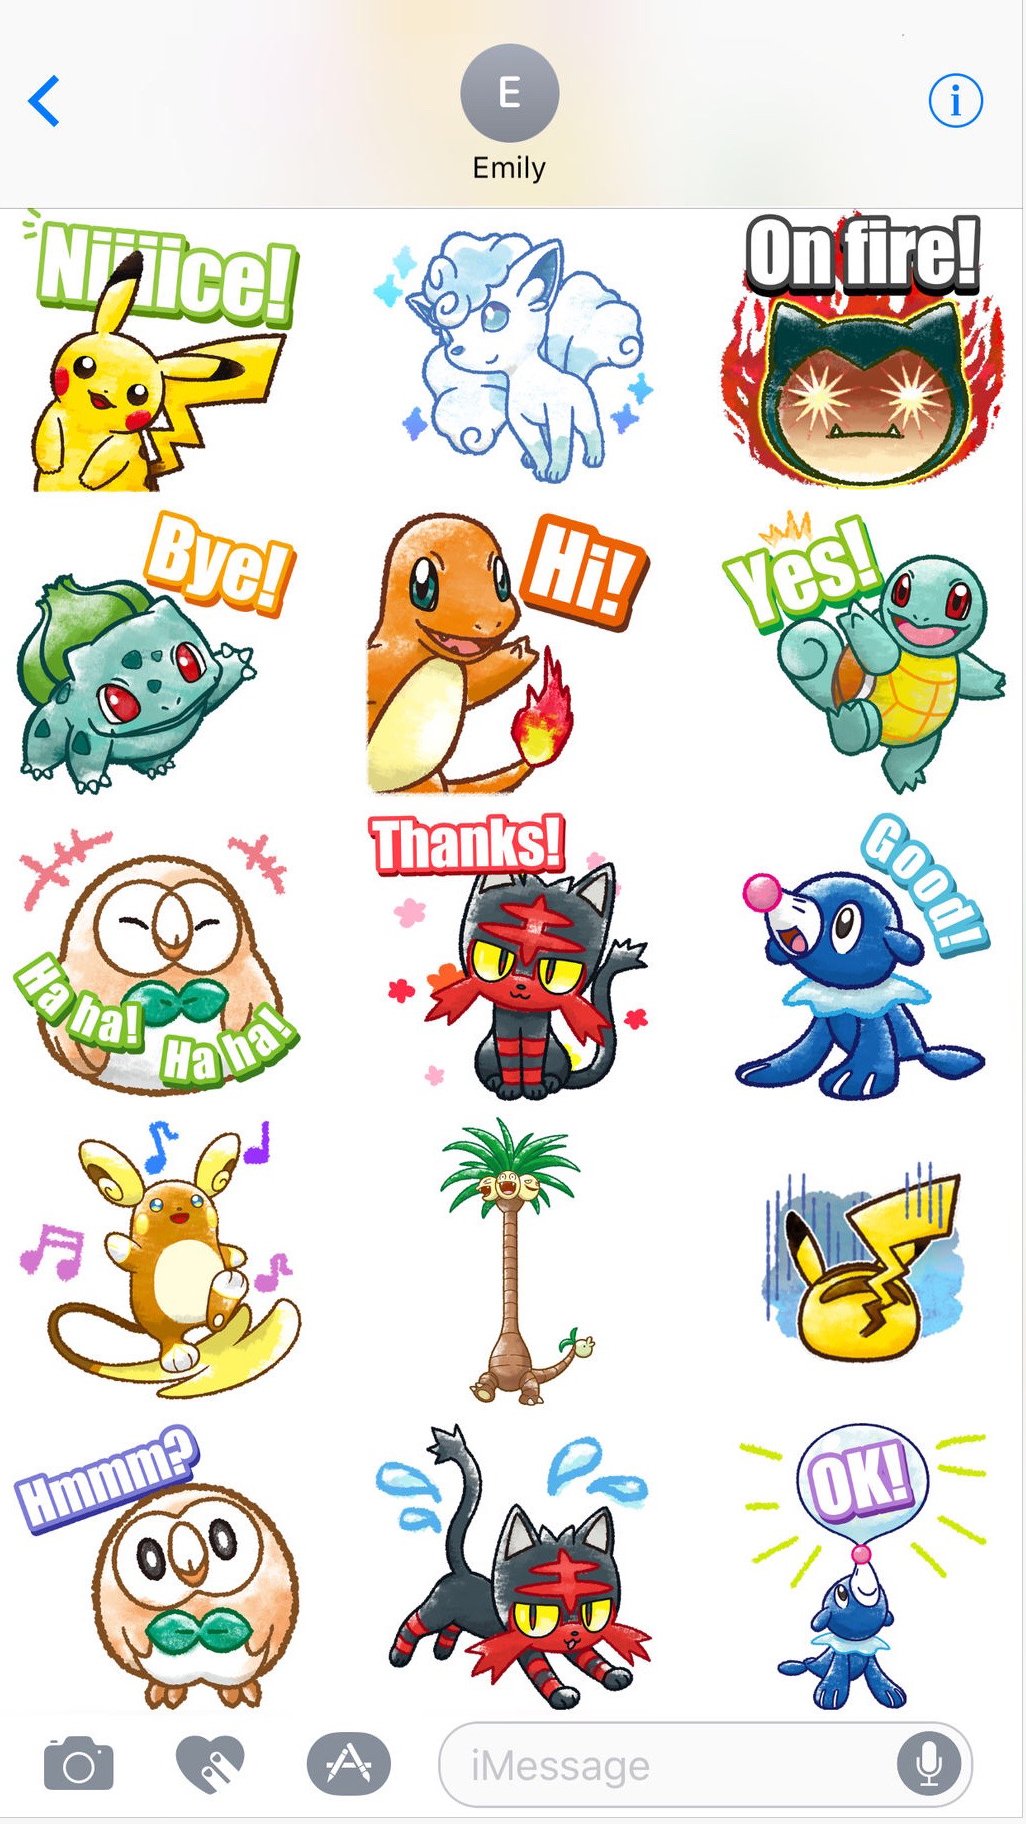 Pokémon Chat Pals stickers now available on iMessage App Store